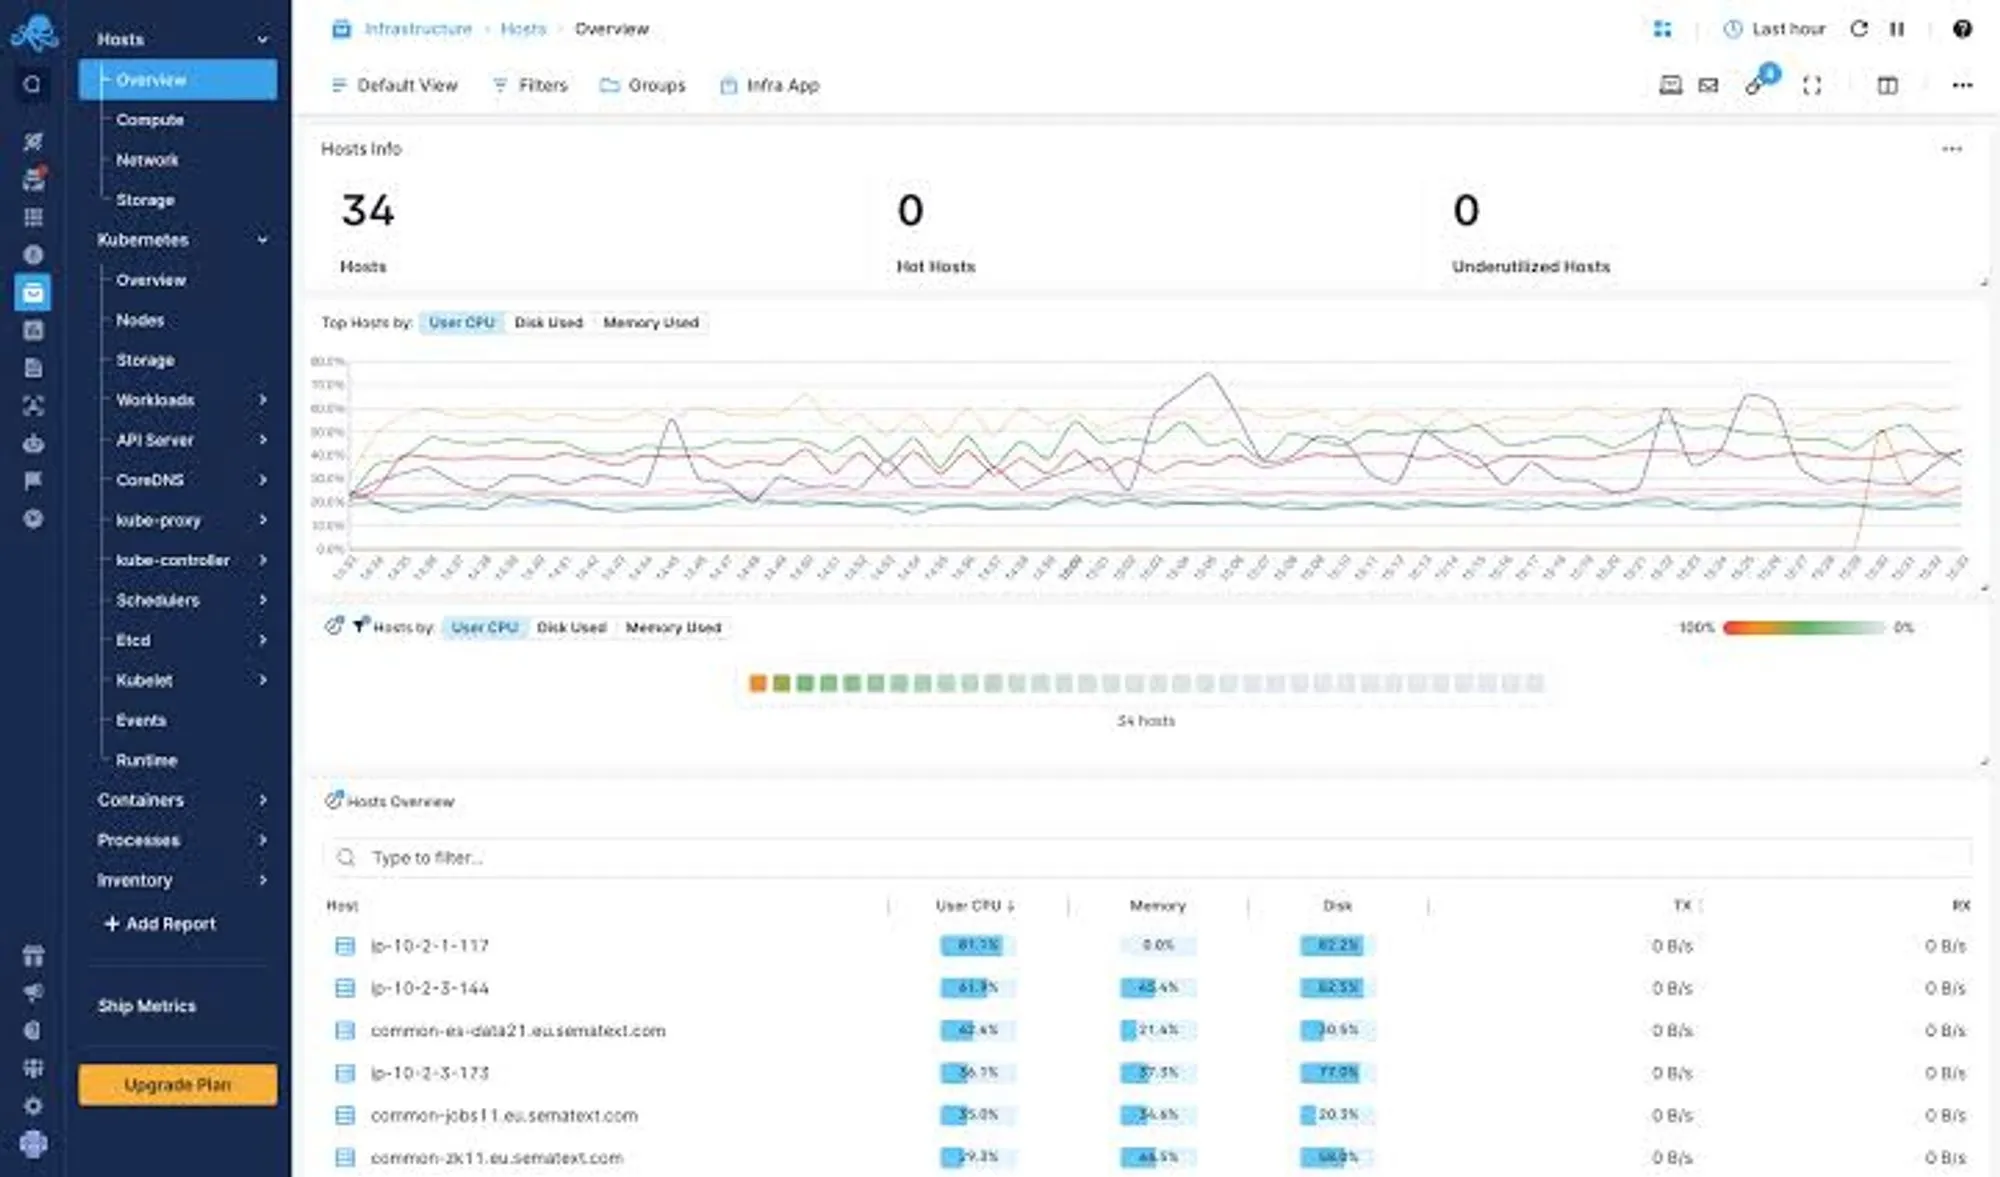 Infrastructure monitoring dashboard in Sematext